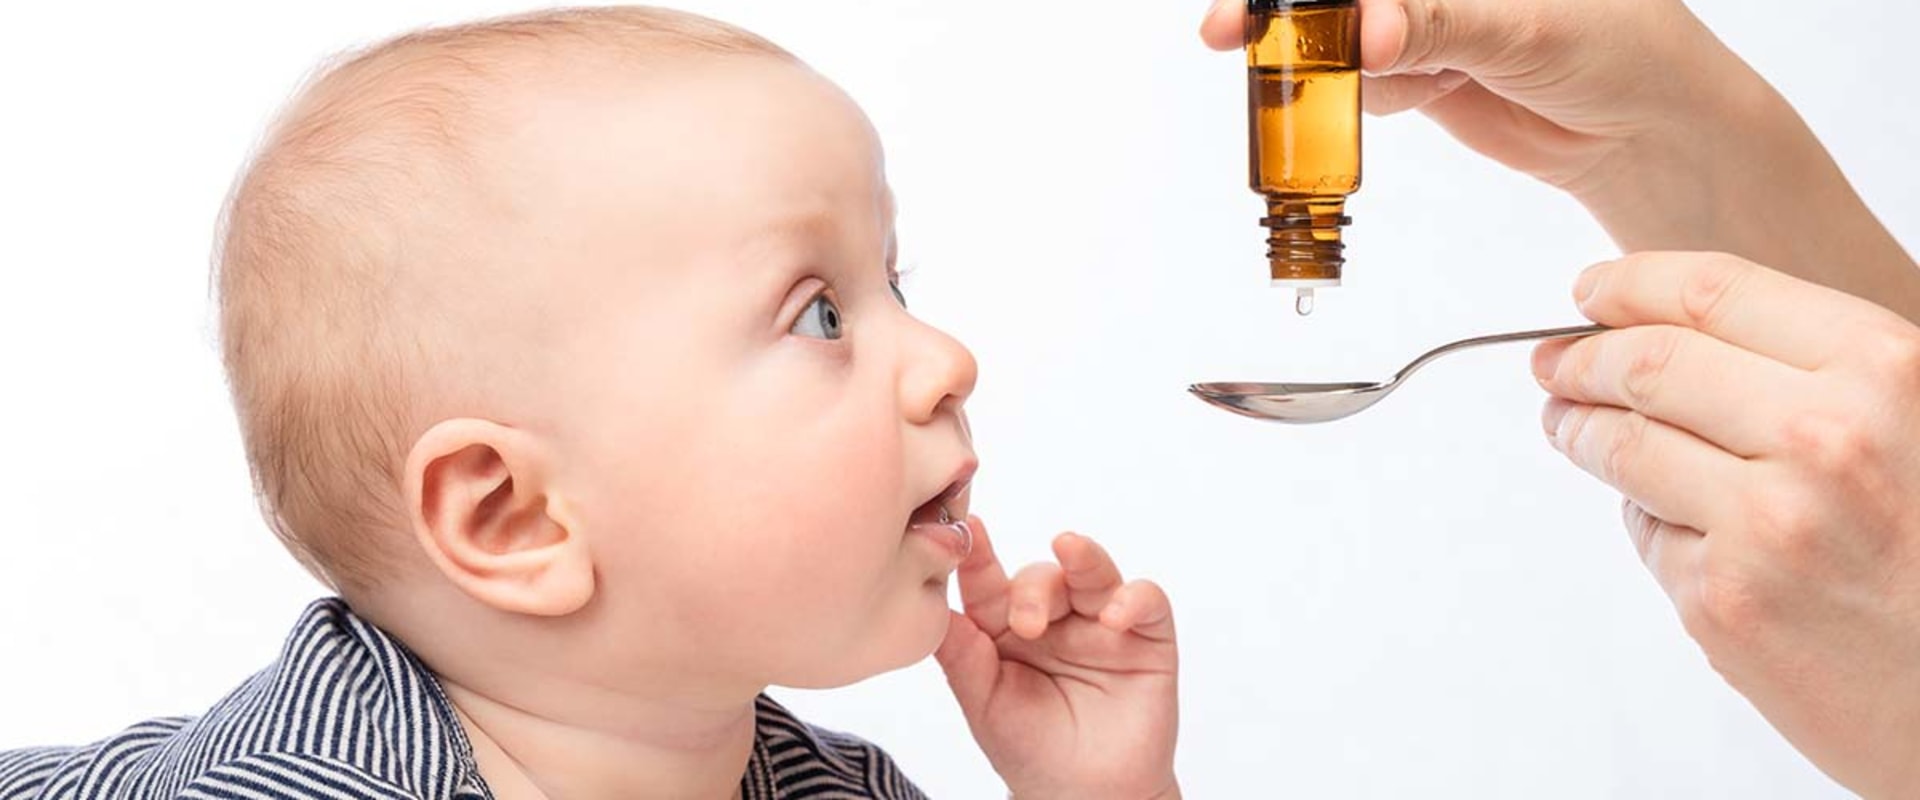 Are Supplements Safe to Take While Breastfeeding? - An Expert's Perspective